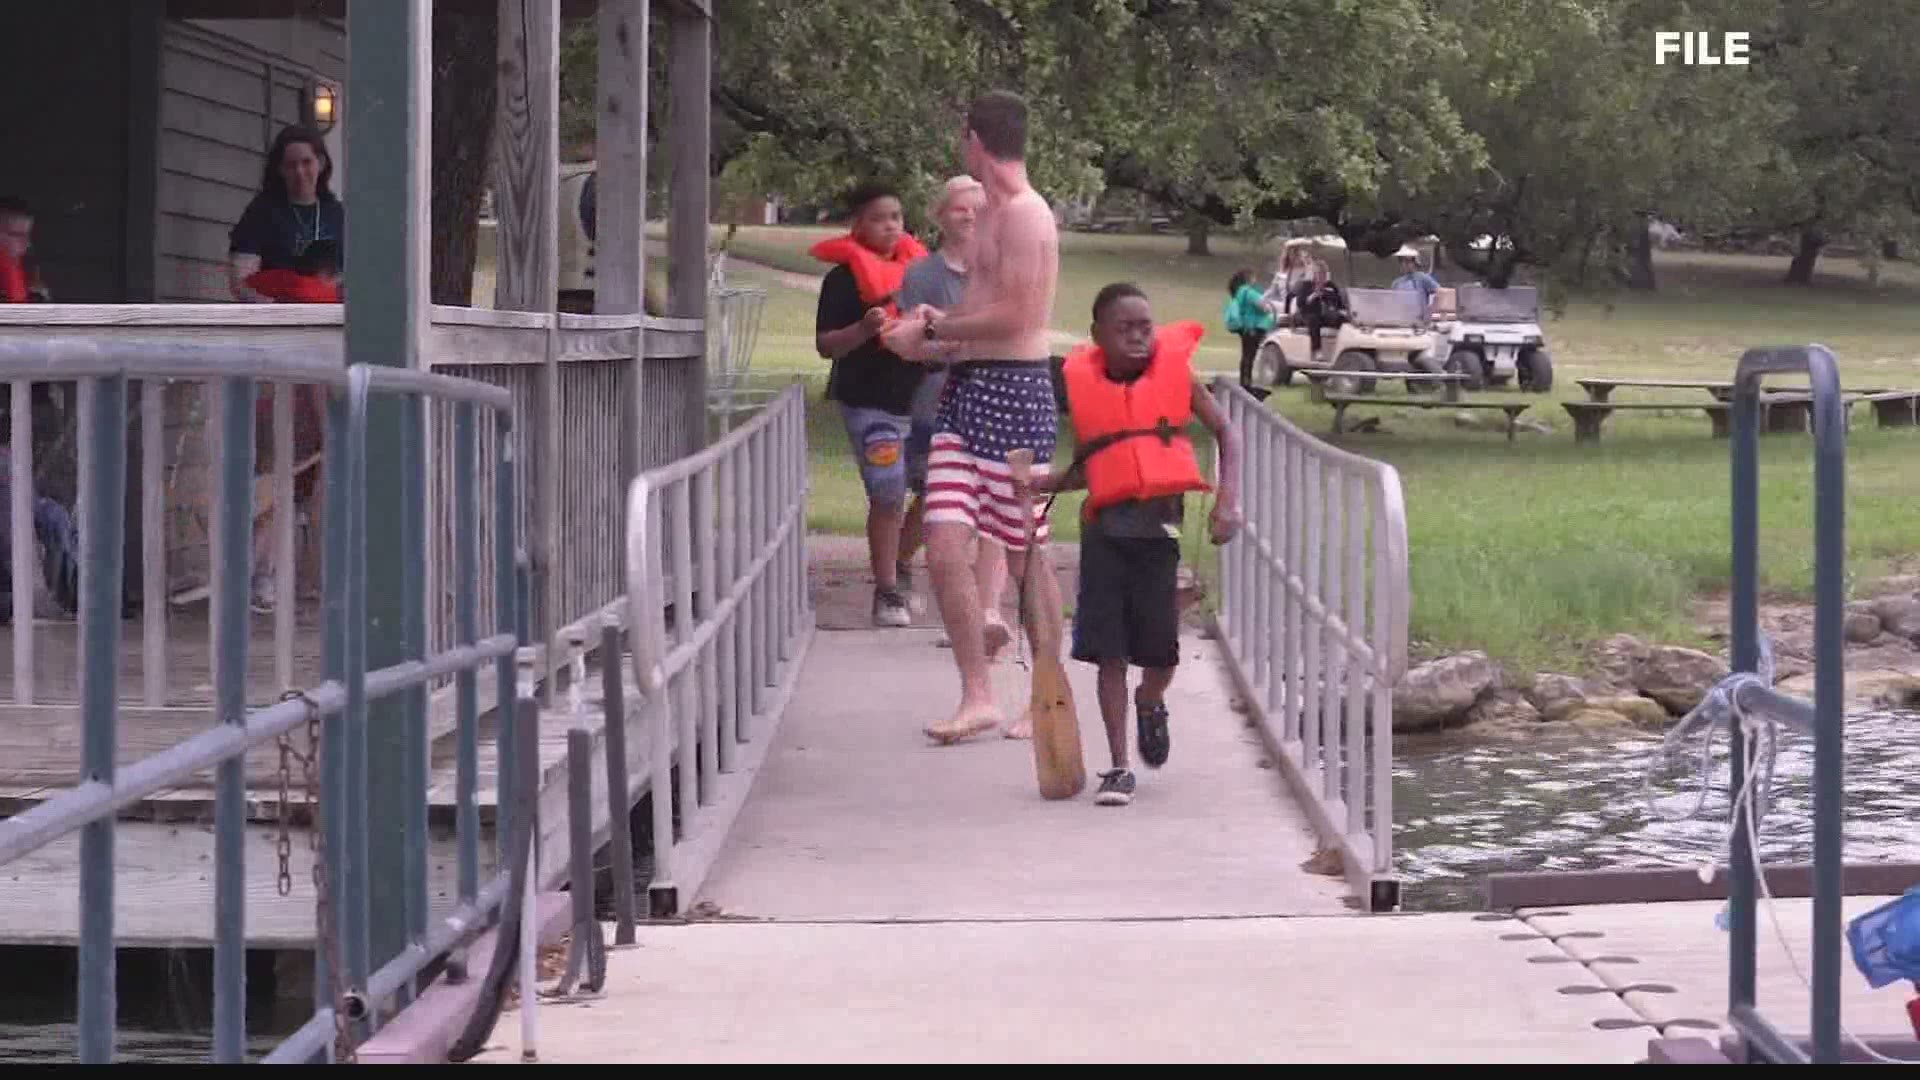 Viewers wanted to know if it was safe for children to go to summer camp.